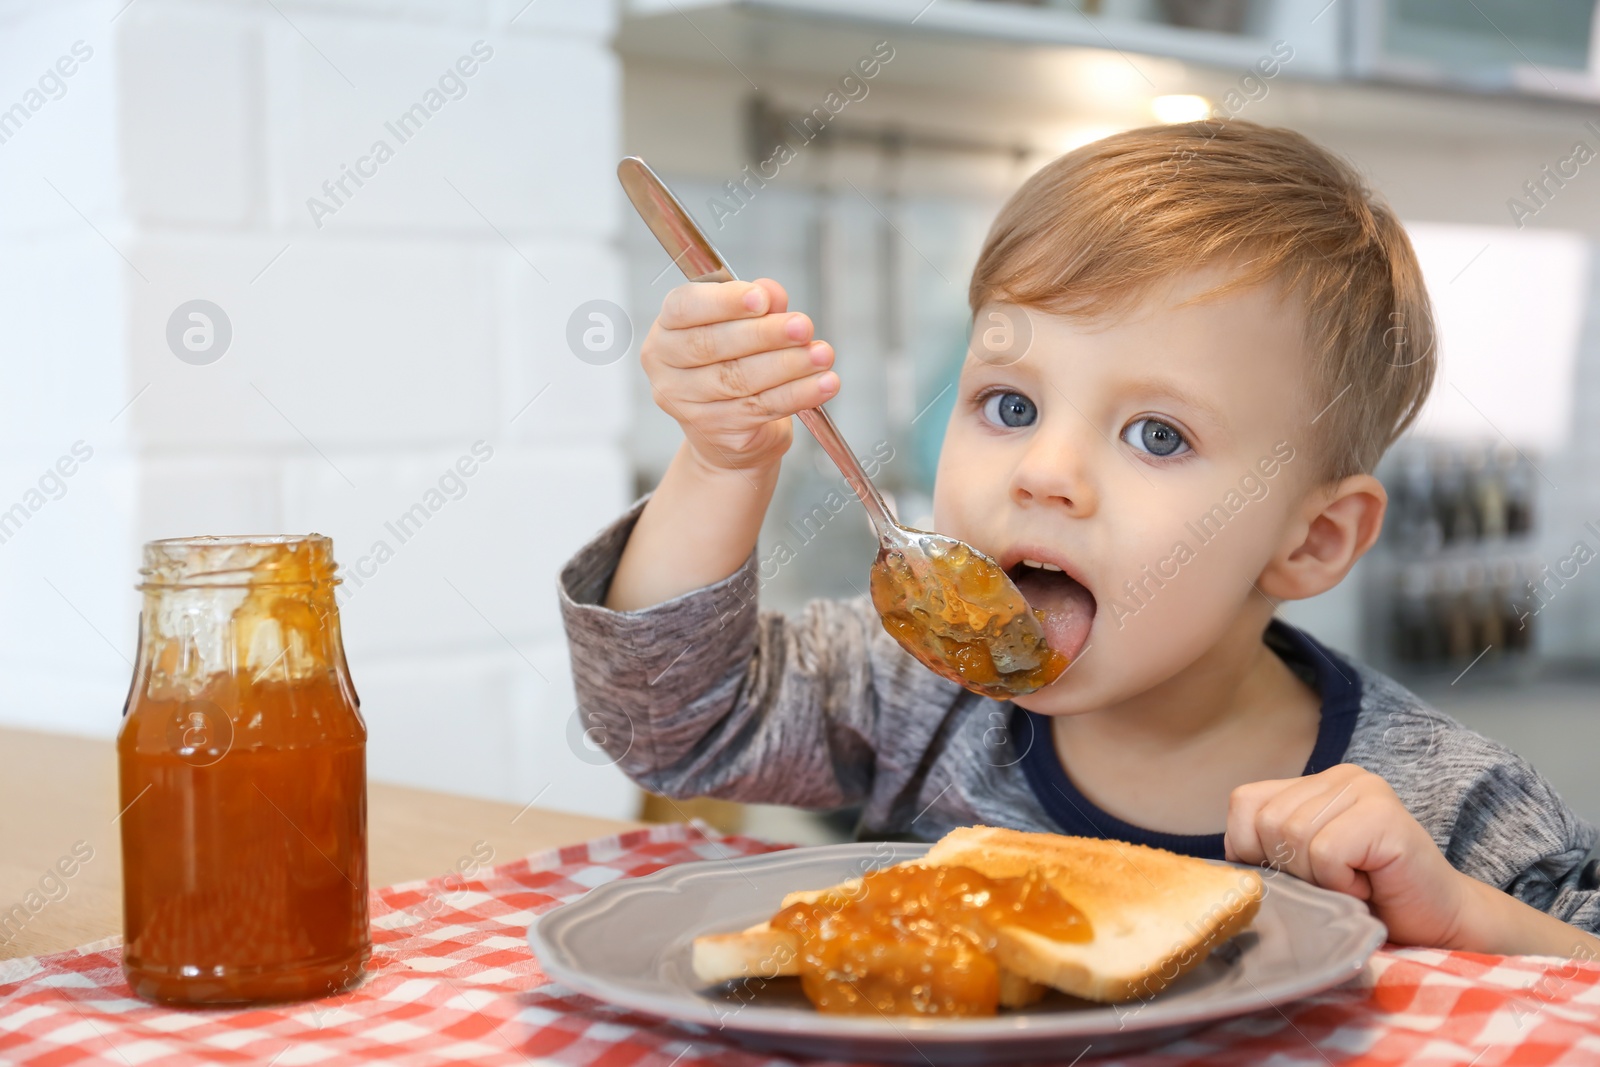 Photo of Little boy eating jam at table in kitchen